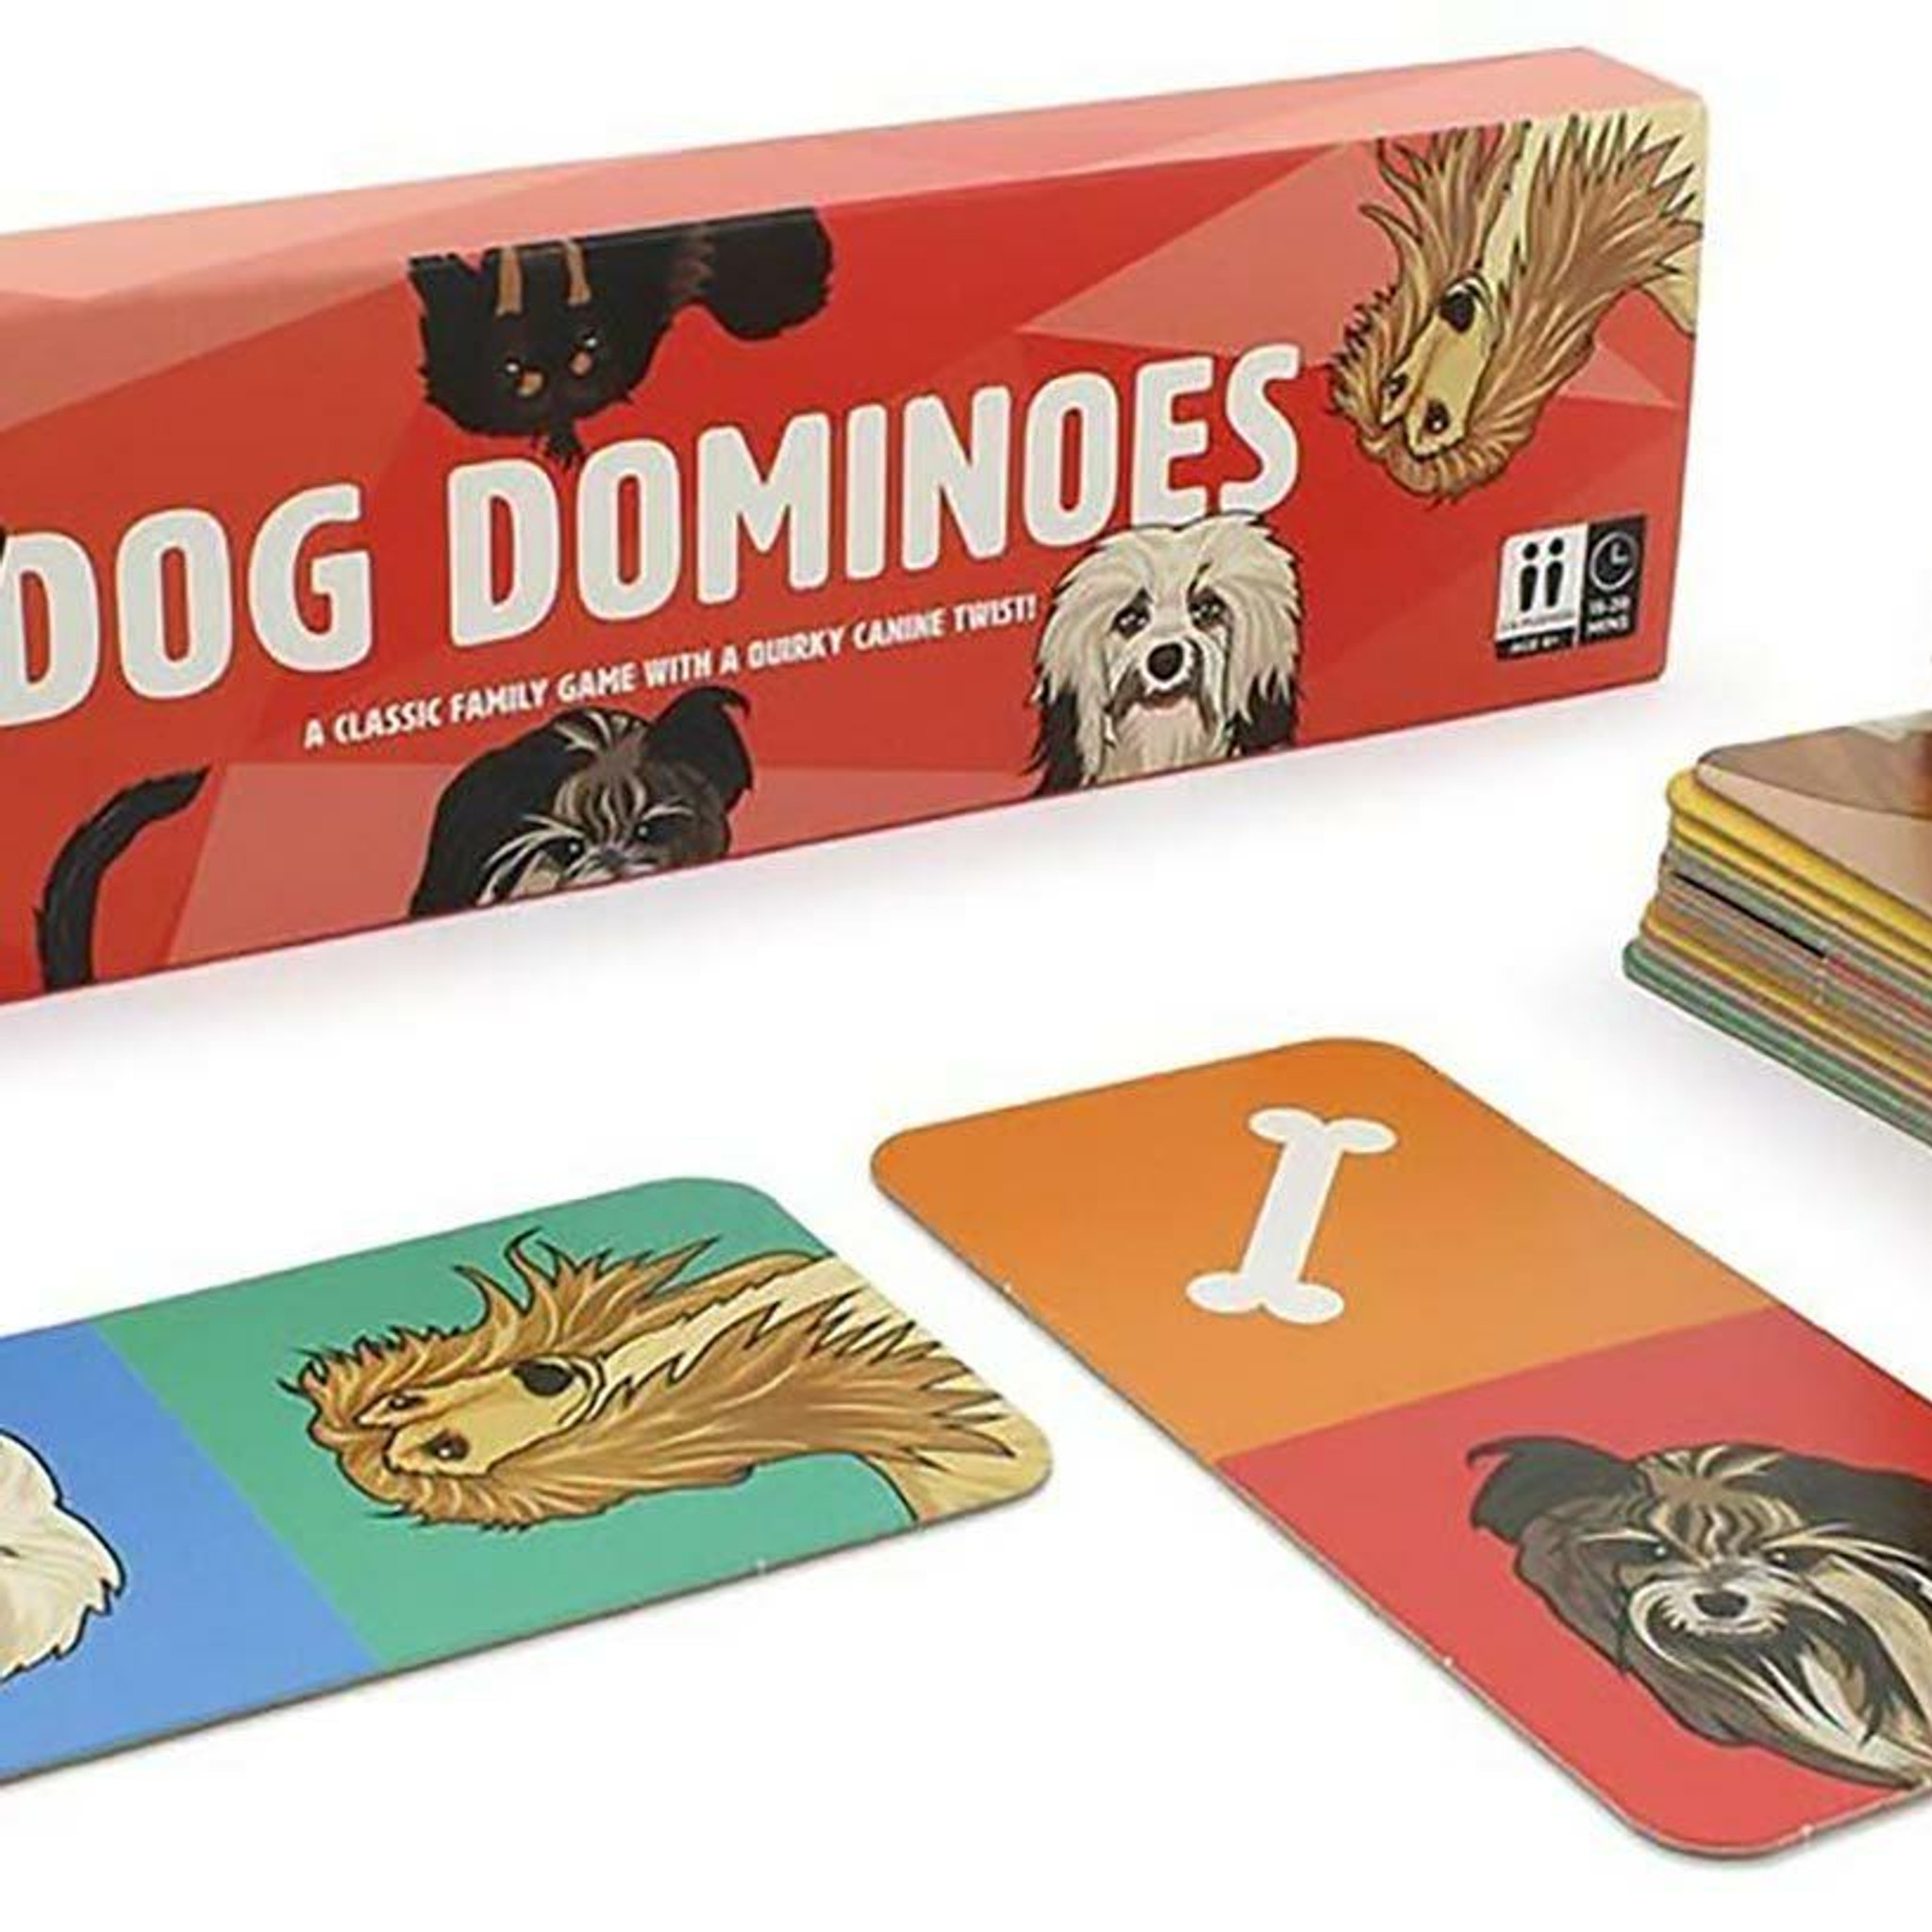 Dog Dominoes is the game that all dog-lovers will want to get their paws on!  Simply match pairs of pooches to become top dog.  It's a classic game with a quirky canine twist!